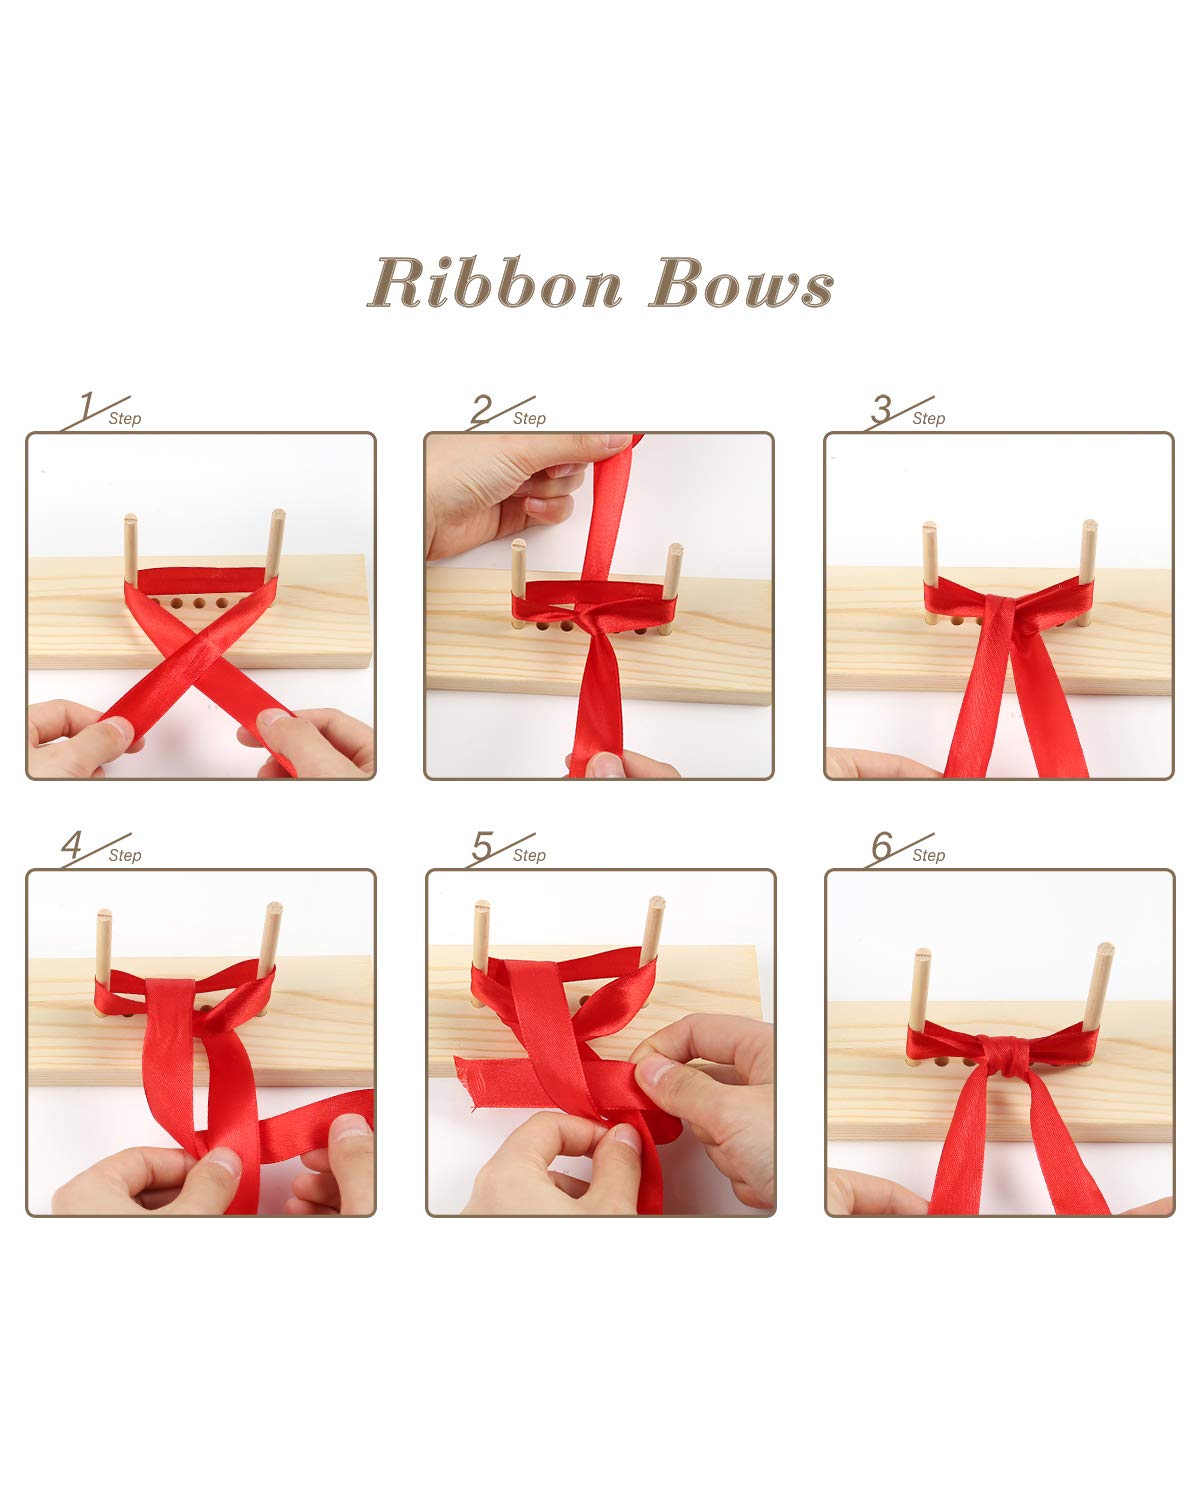 Ackitry Extended Bow Maker for Ribbon for Wreaths Wooden Ribbon Bow Maker  for Christmas Bows Hair Bows Corsages Various Crafts